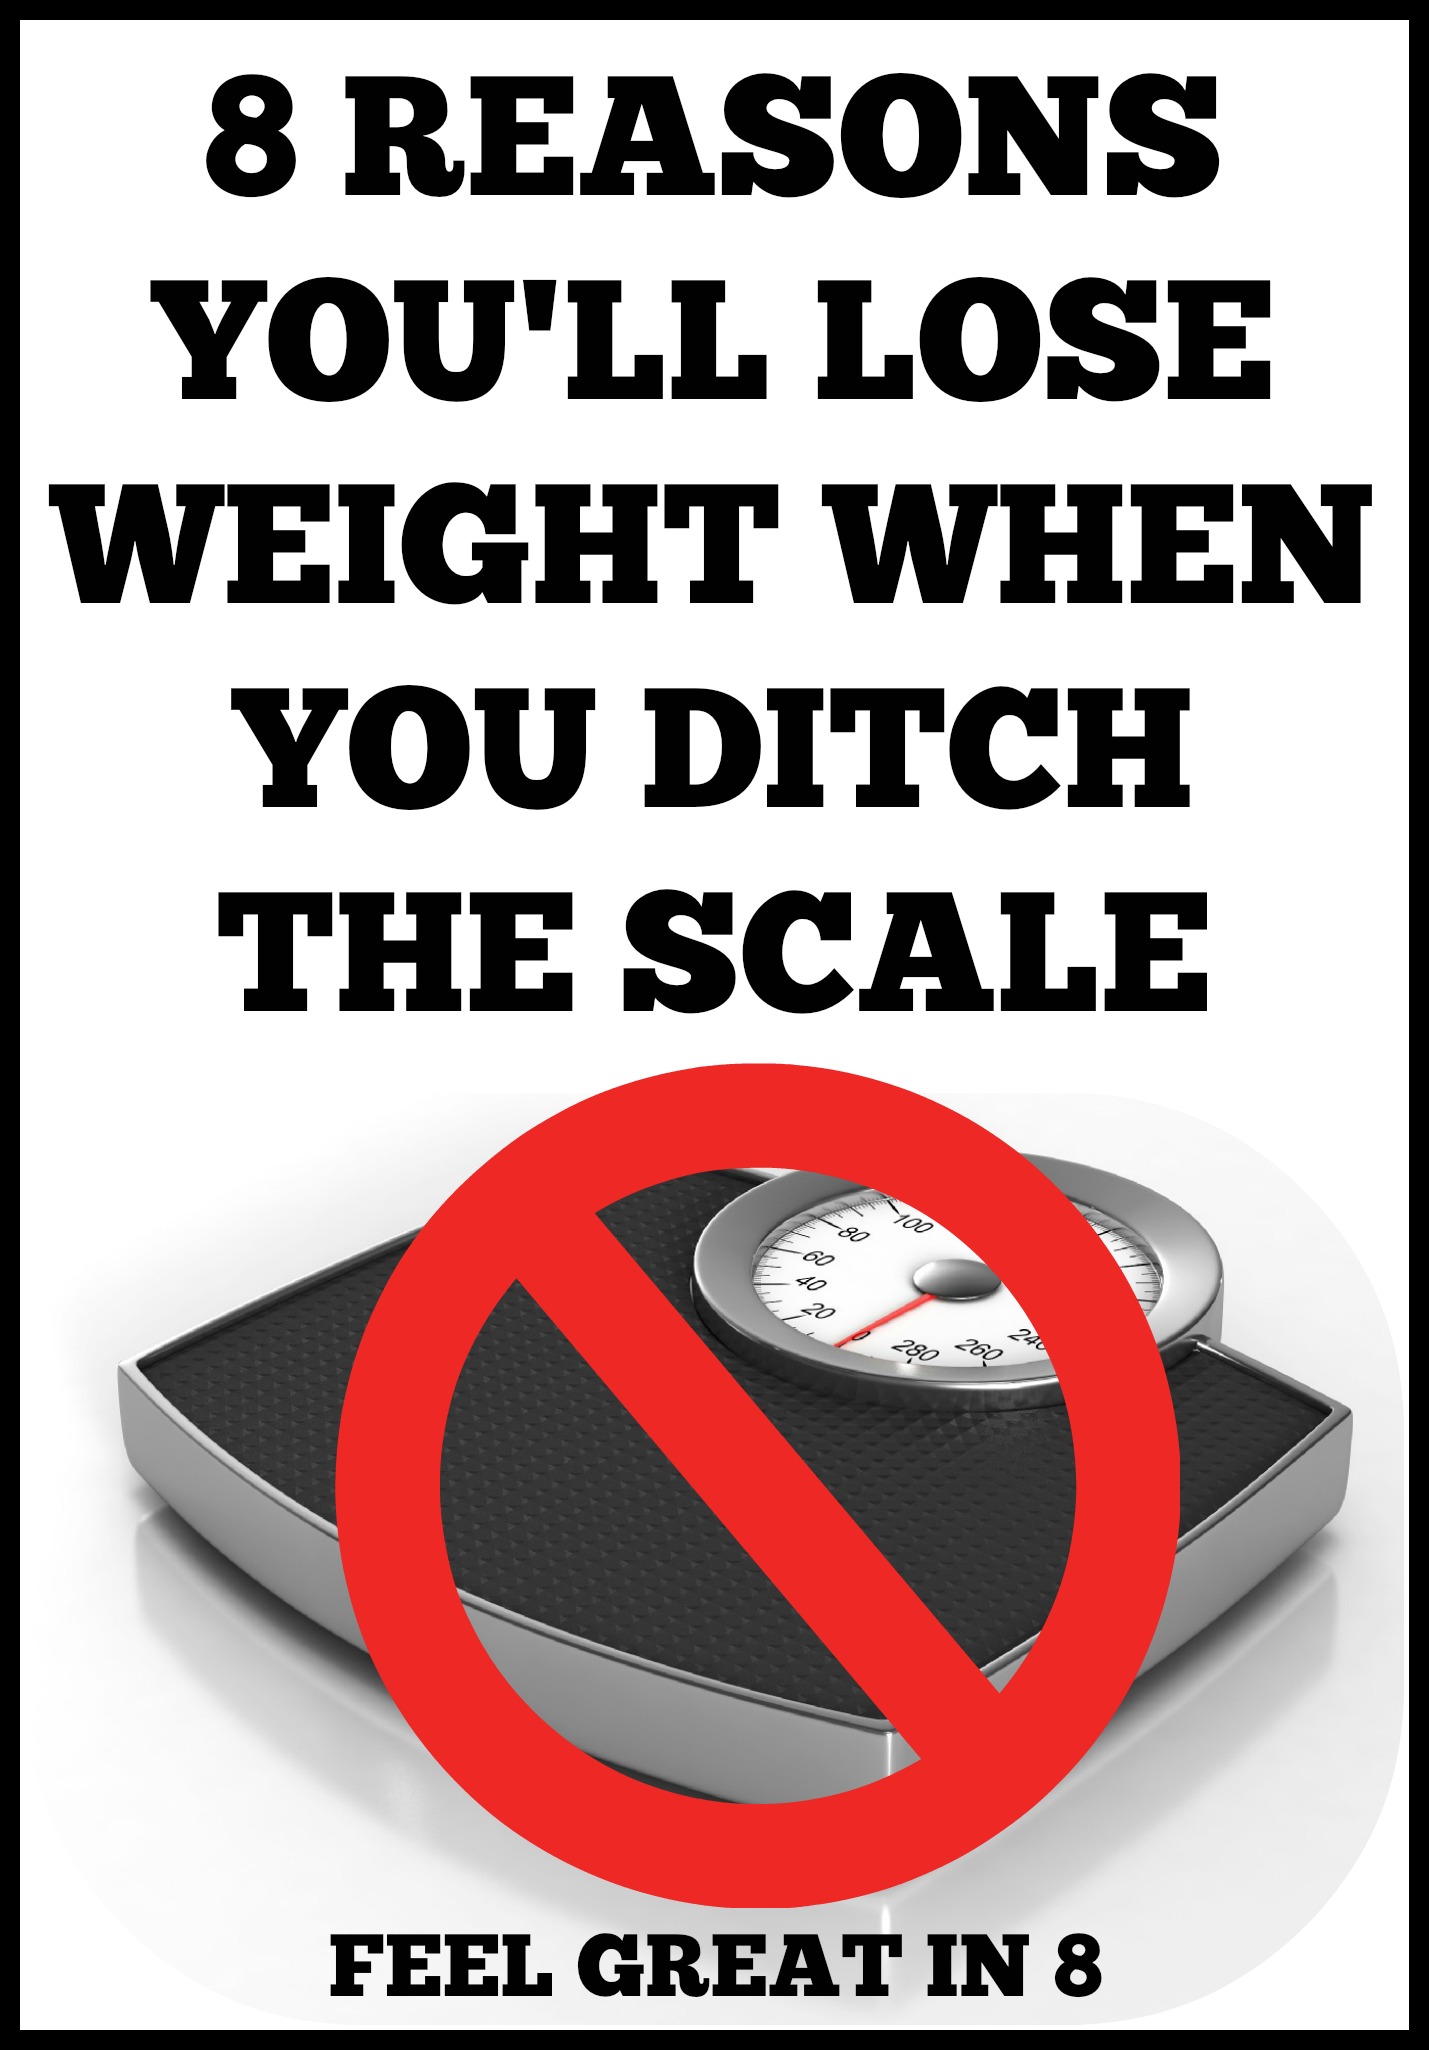 7 Reasons to Scrap the Scale